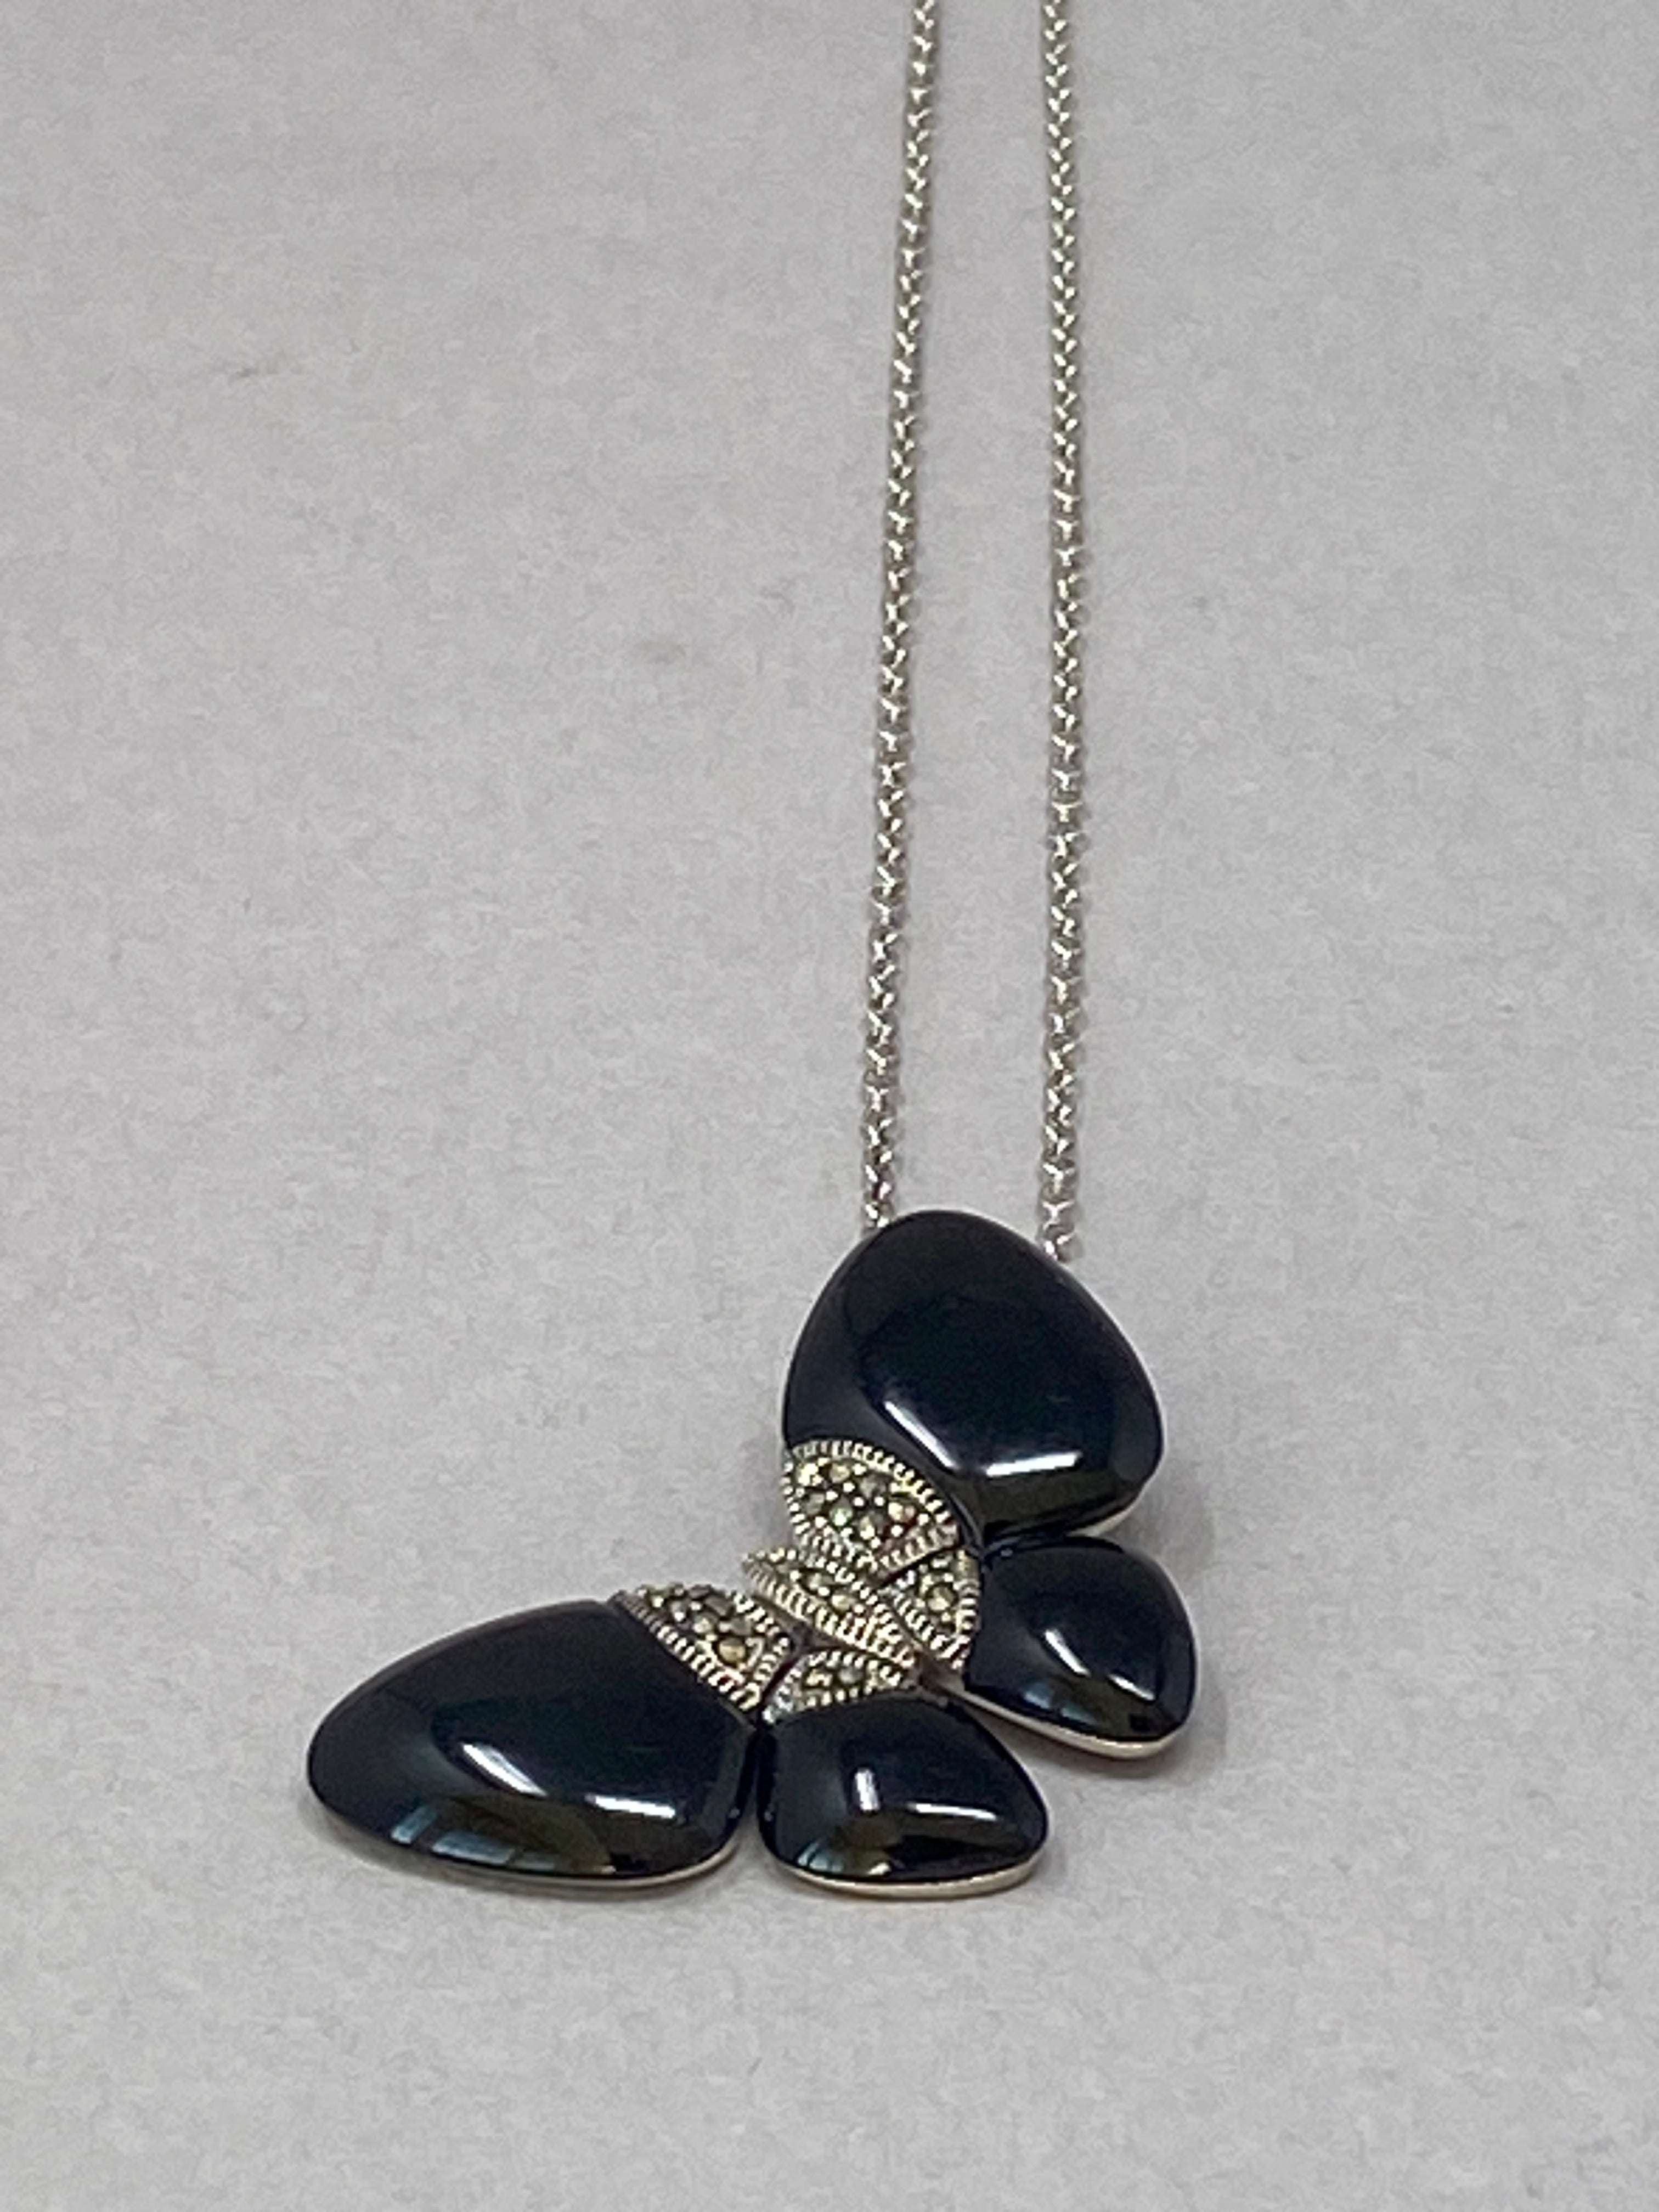 Silver, Black Onyx and Marcasite Butterfly Necklace